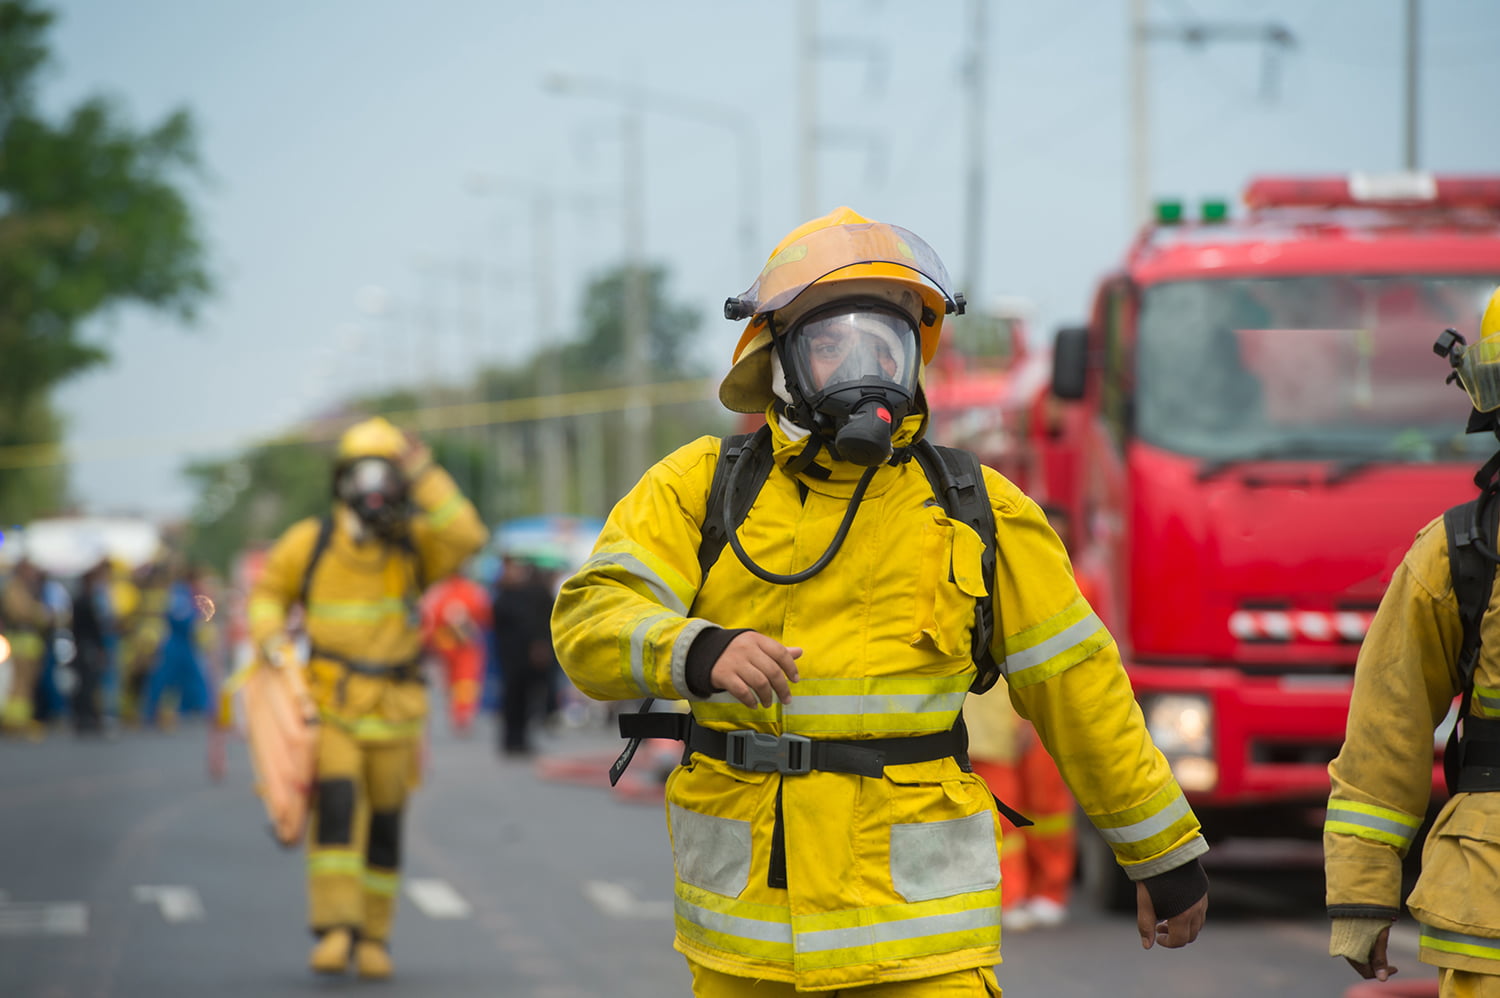 firefighter with oxygen mask